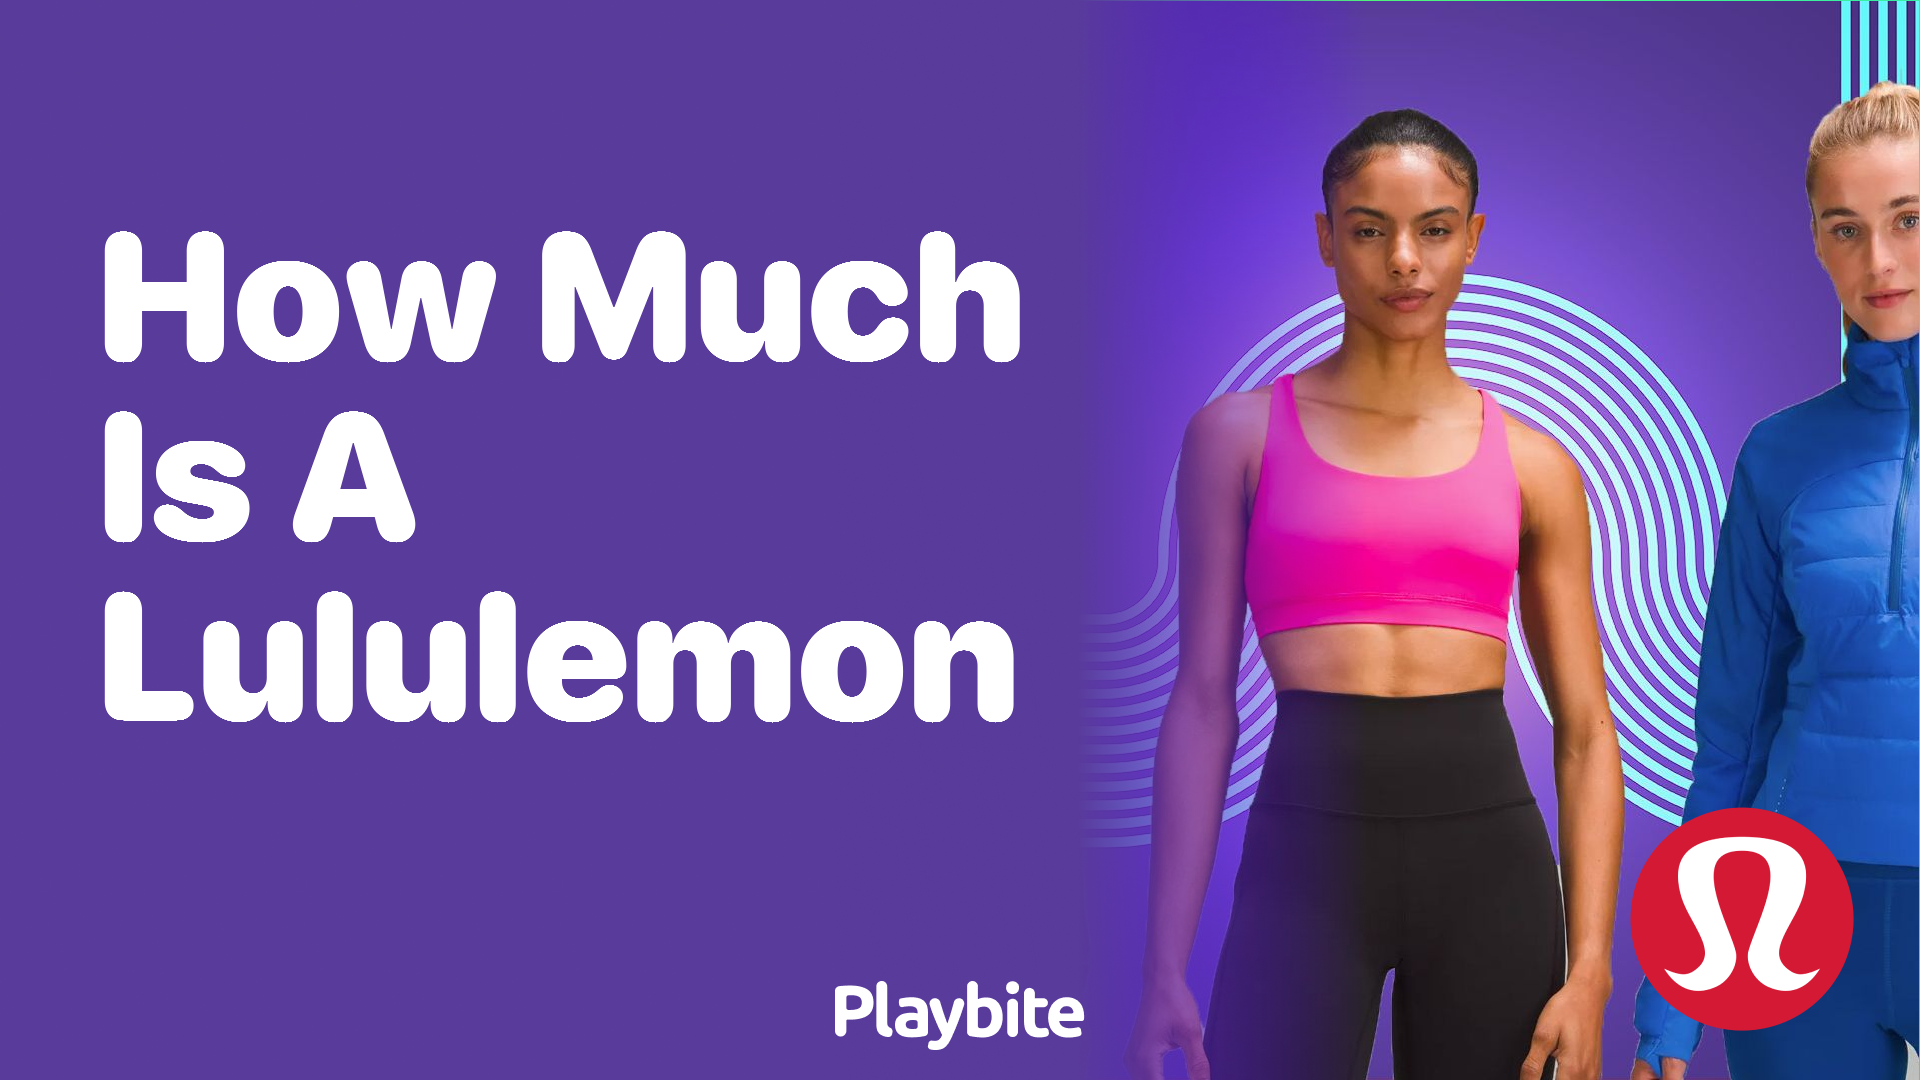 How Much Does Lululemon Apparel Cost? - Playbite